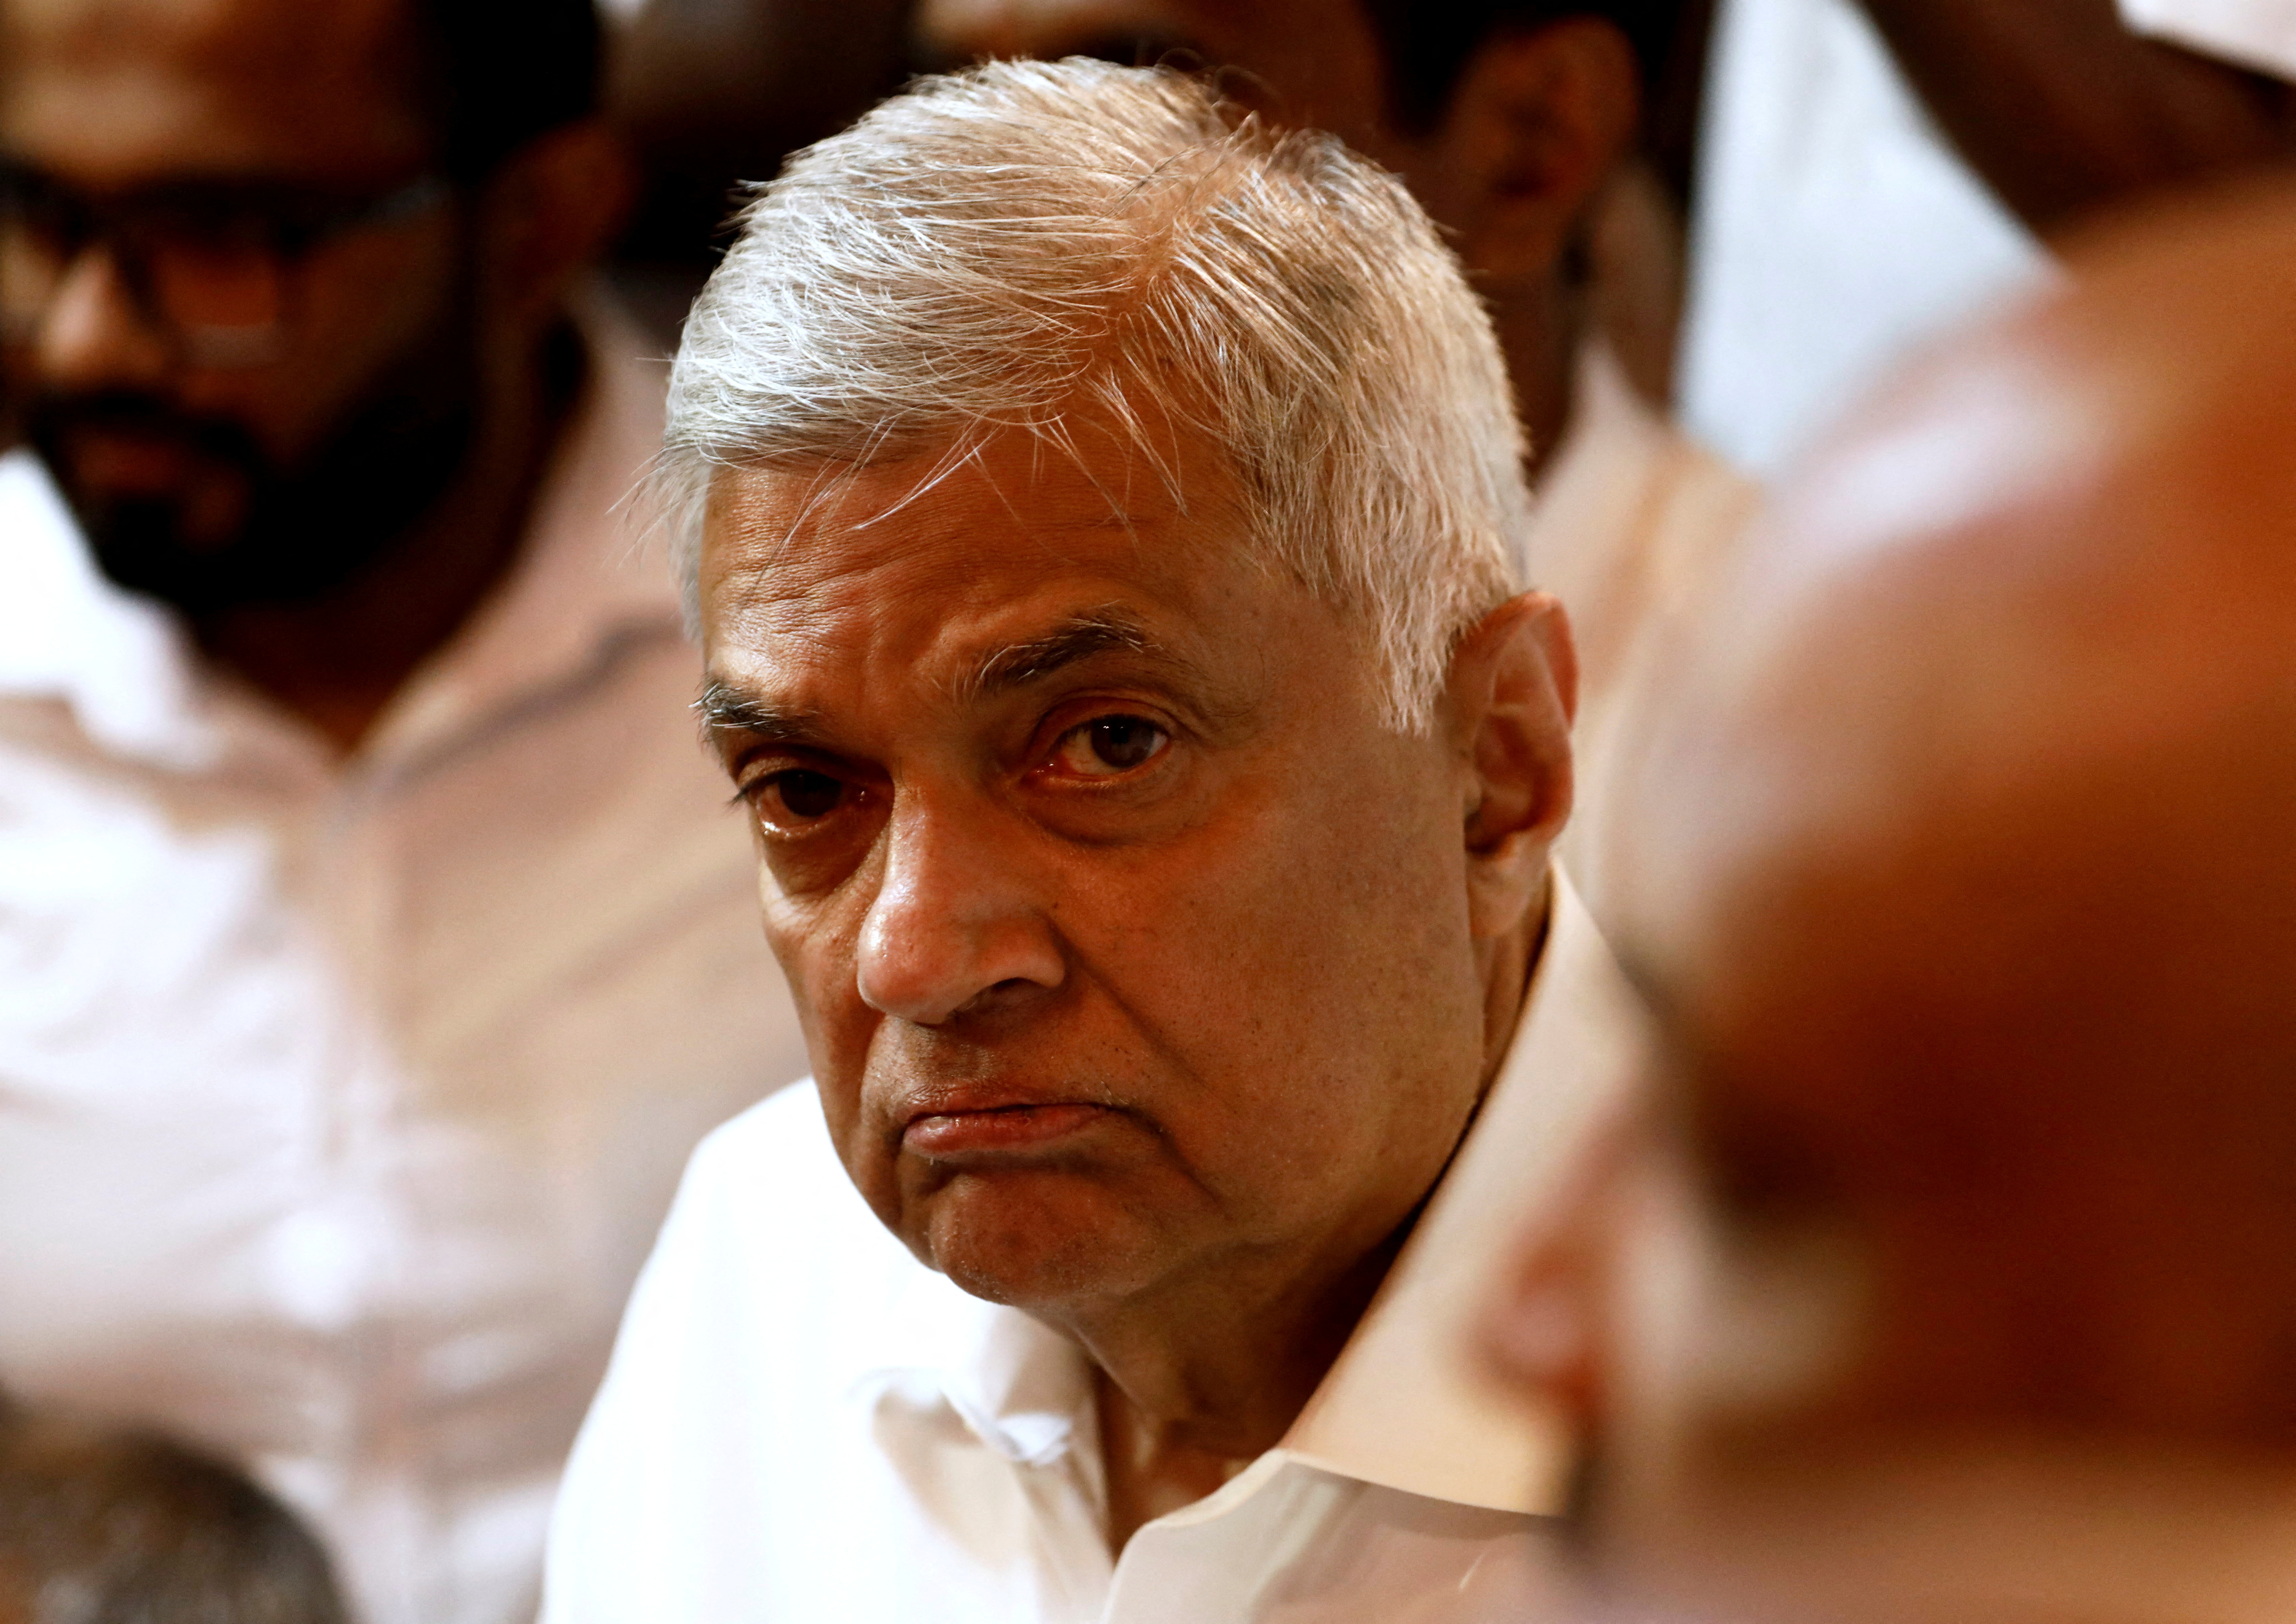 The 'new' PM will not be a panacea to Sri Lanka's problems